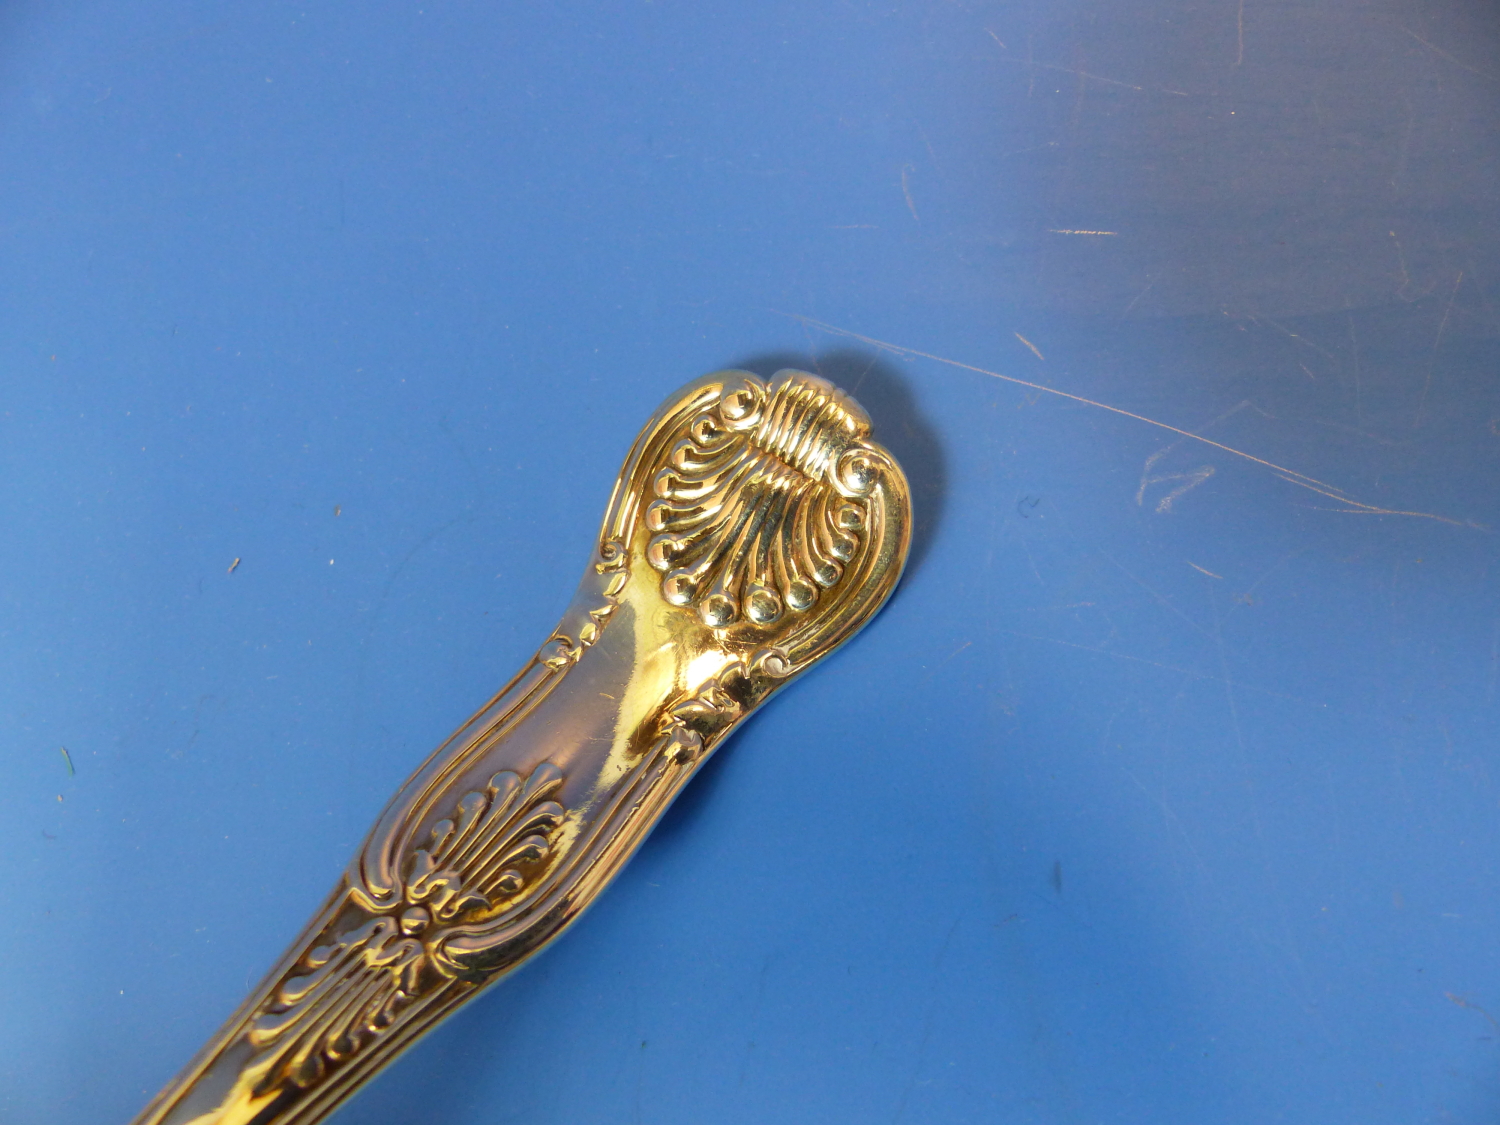 A PAIR OF 19th C. QUEENS PATTERN HALLMARKED SILVER SAUCE LADLES DATED 1851 GLASGOW FOR JOHN - Image 24 of 28